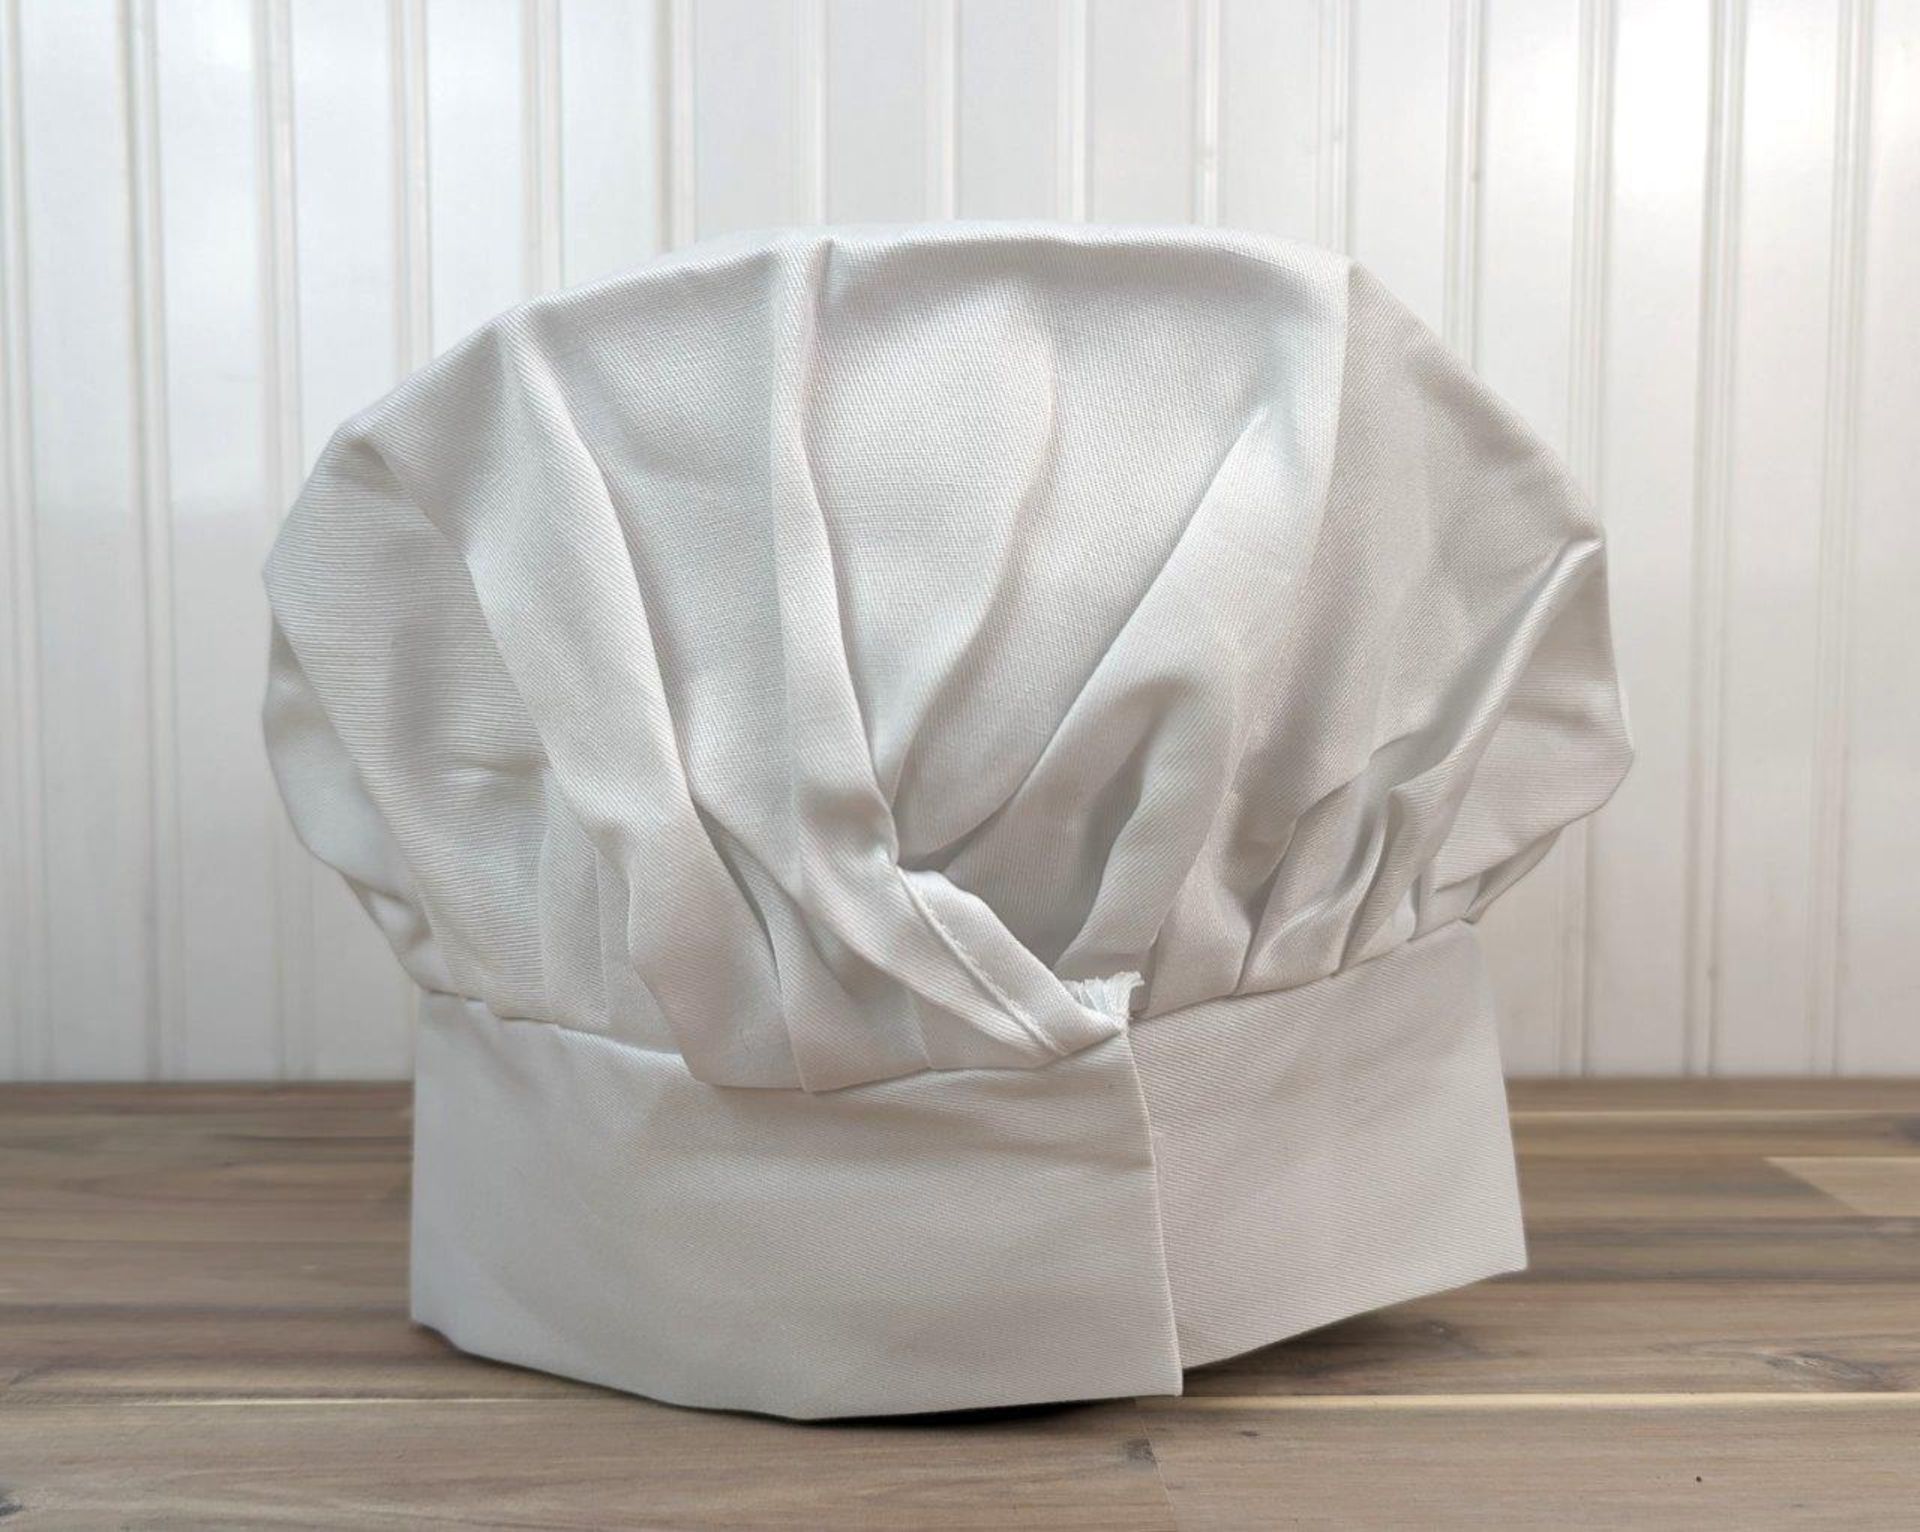 13" CHEF'S HATS - LOT OF 12 - Image 3 of 3